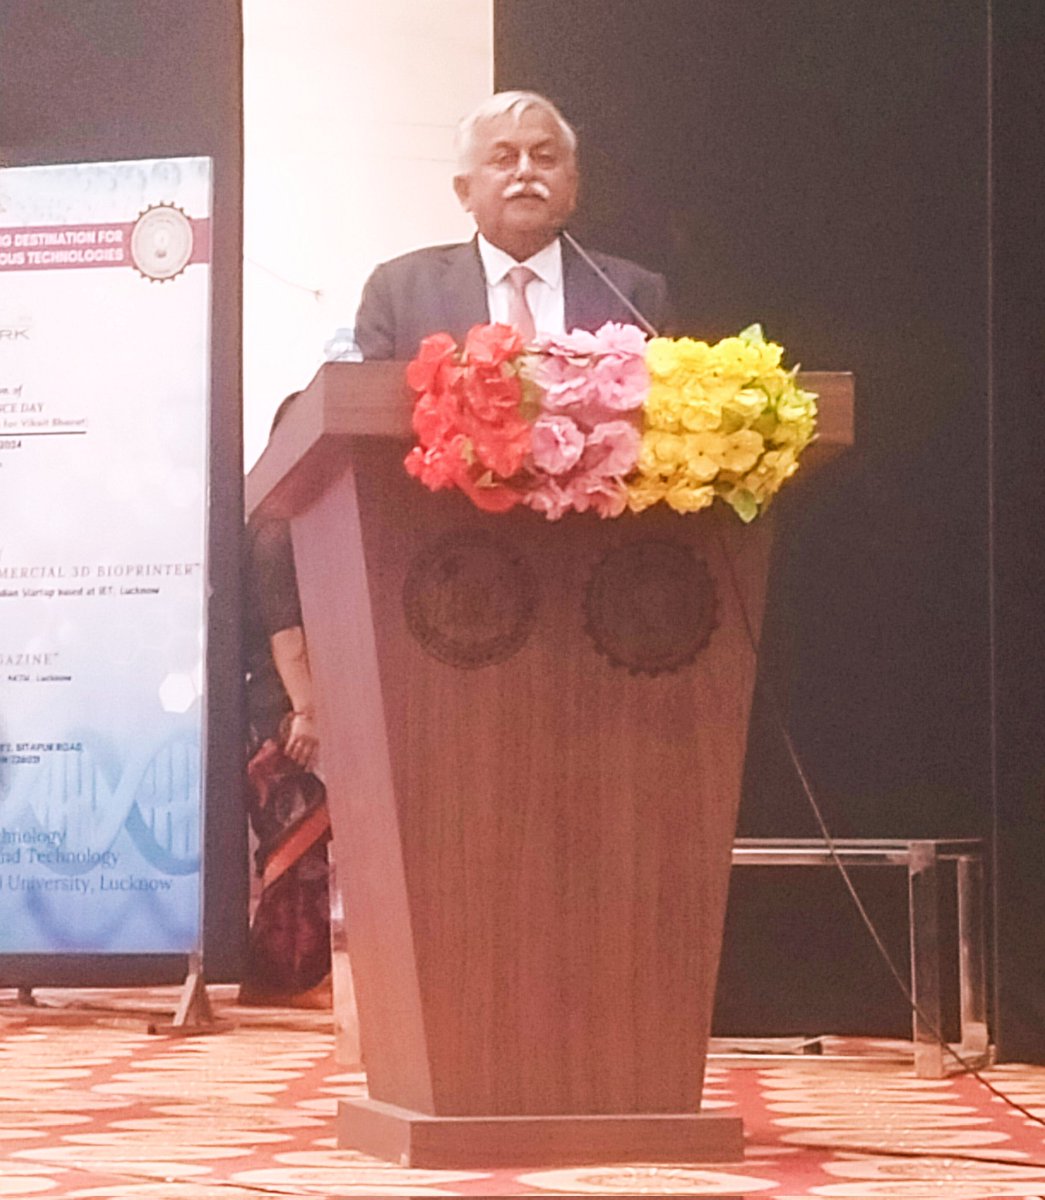 Mr. @AwasthiAwanishK graced the #NationalScienceDay celebrations at IET, Lucknow. Sir, under your supervision UP is coming up as #Pharma Hub with Pharma Parks being allocated by @UPGovt. Let's create an ecosystem that ignites innovation & boosts #AatmanirbharBharat #MakeinIndia🚀